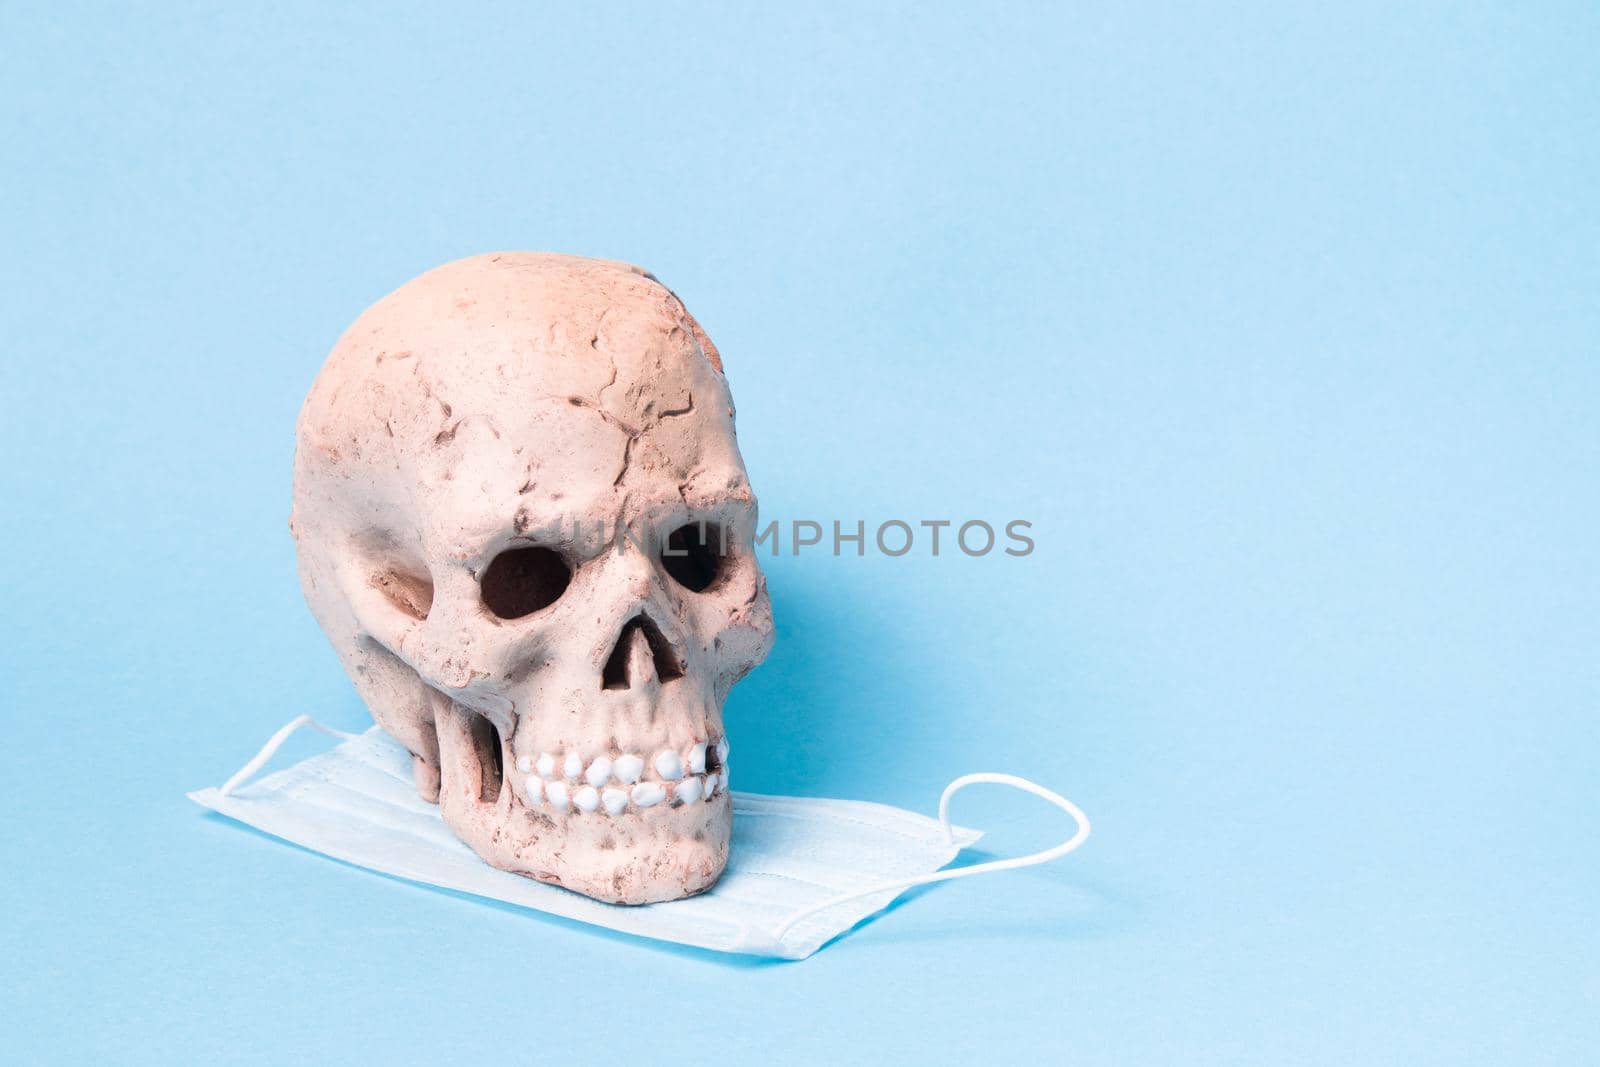 ceramic skull and blue protective medical face mask on a blue background, copy space